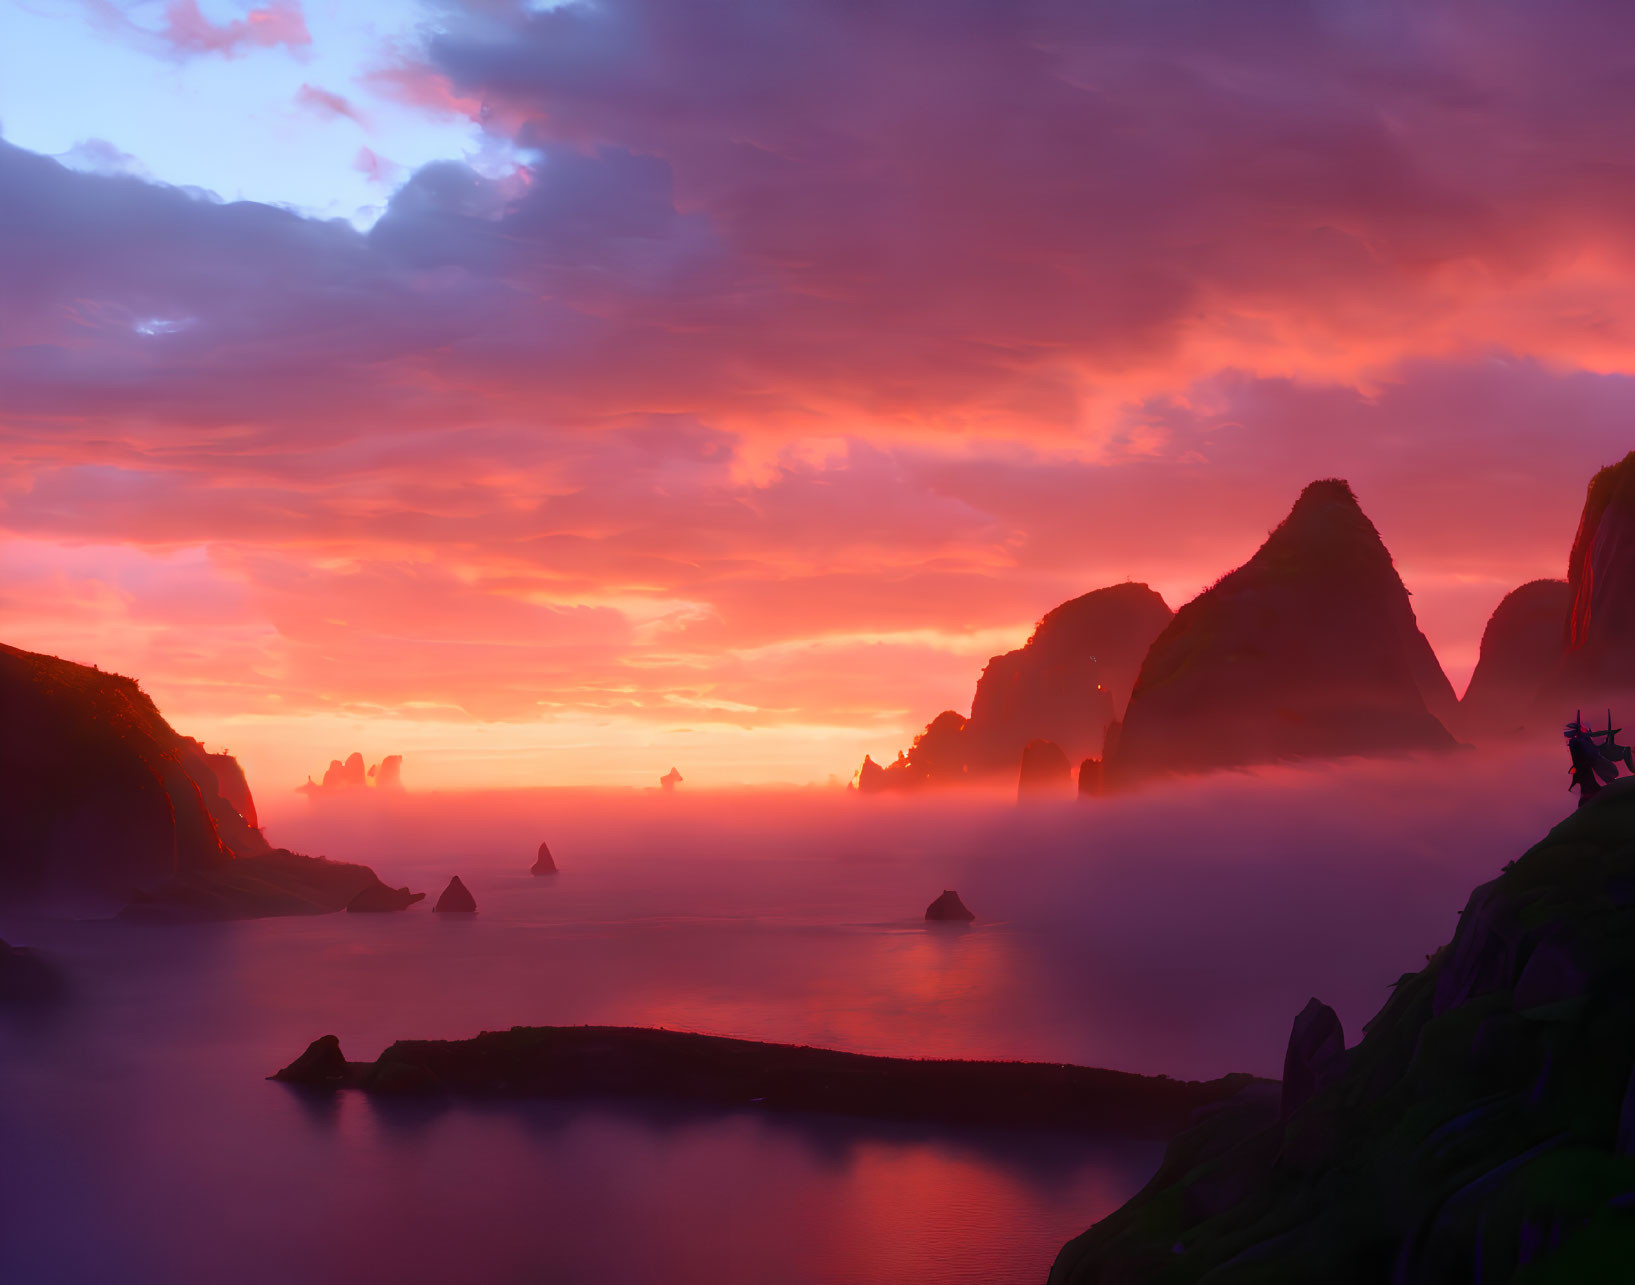 Ethereal dusk landscape with purple and orange skies, misty waters, and silhouetted